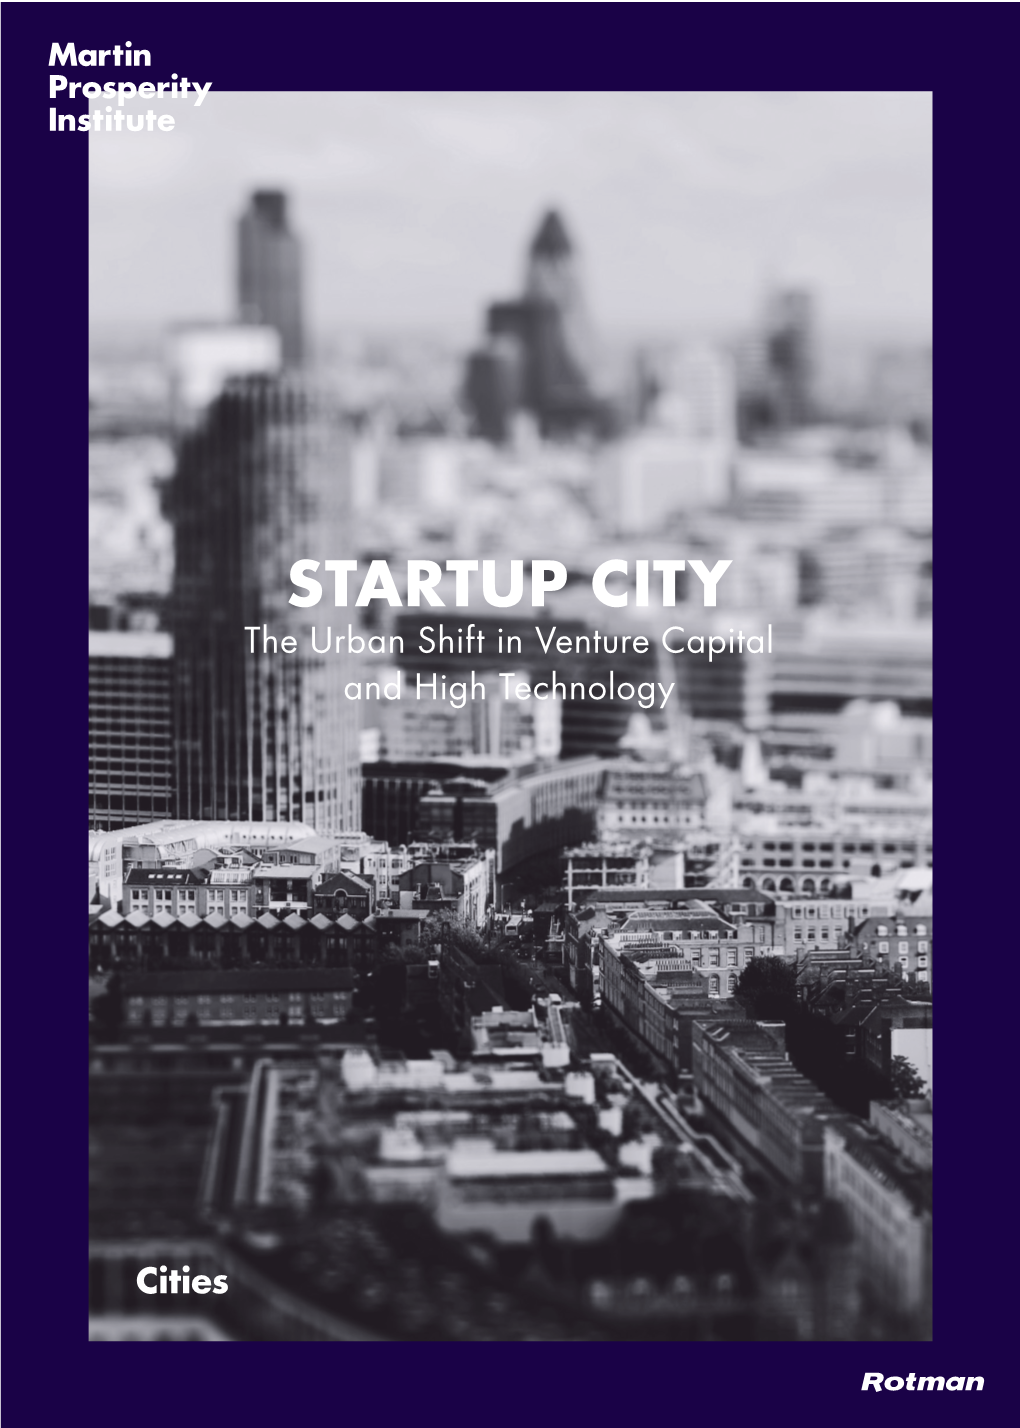 Startup City: the Urban Shift in Venture Capital and High Technology